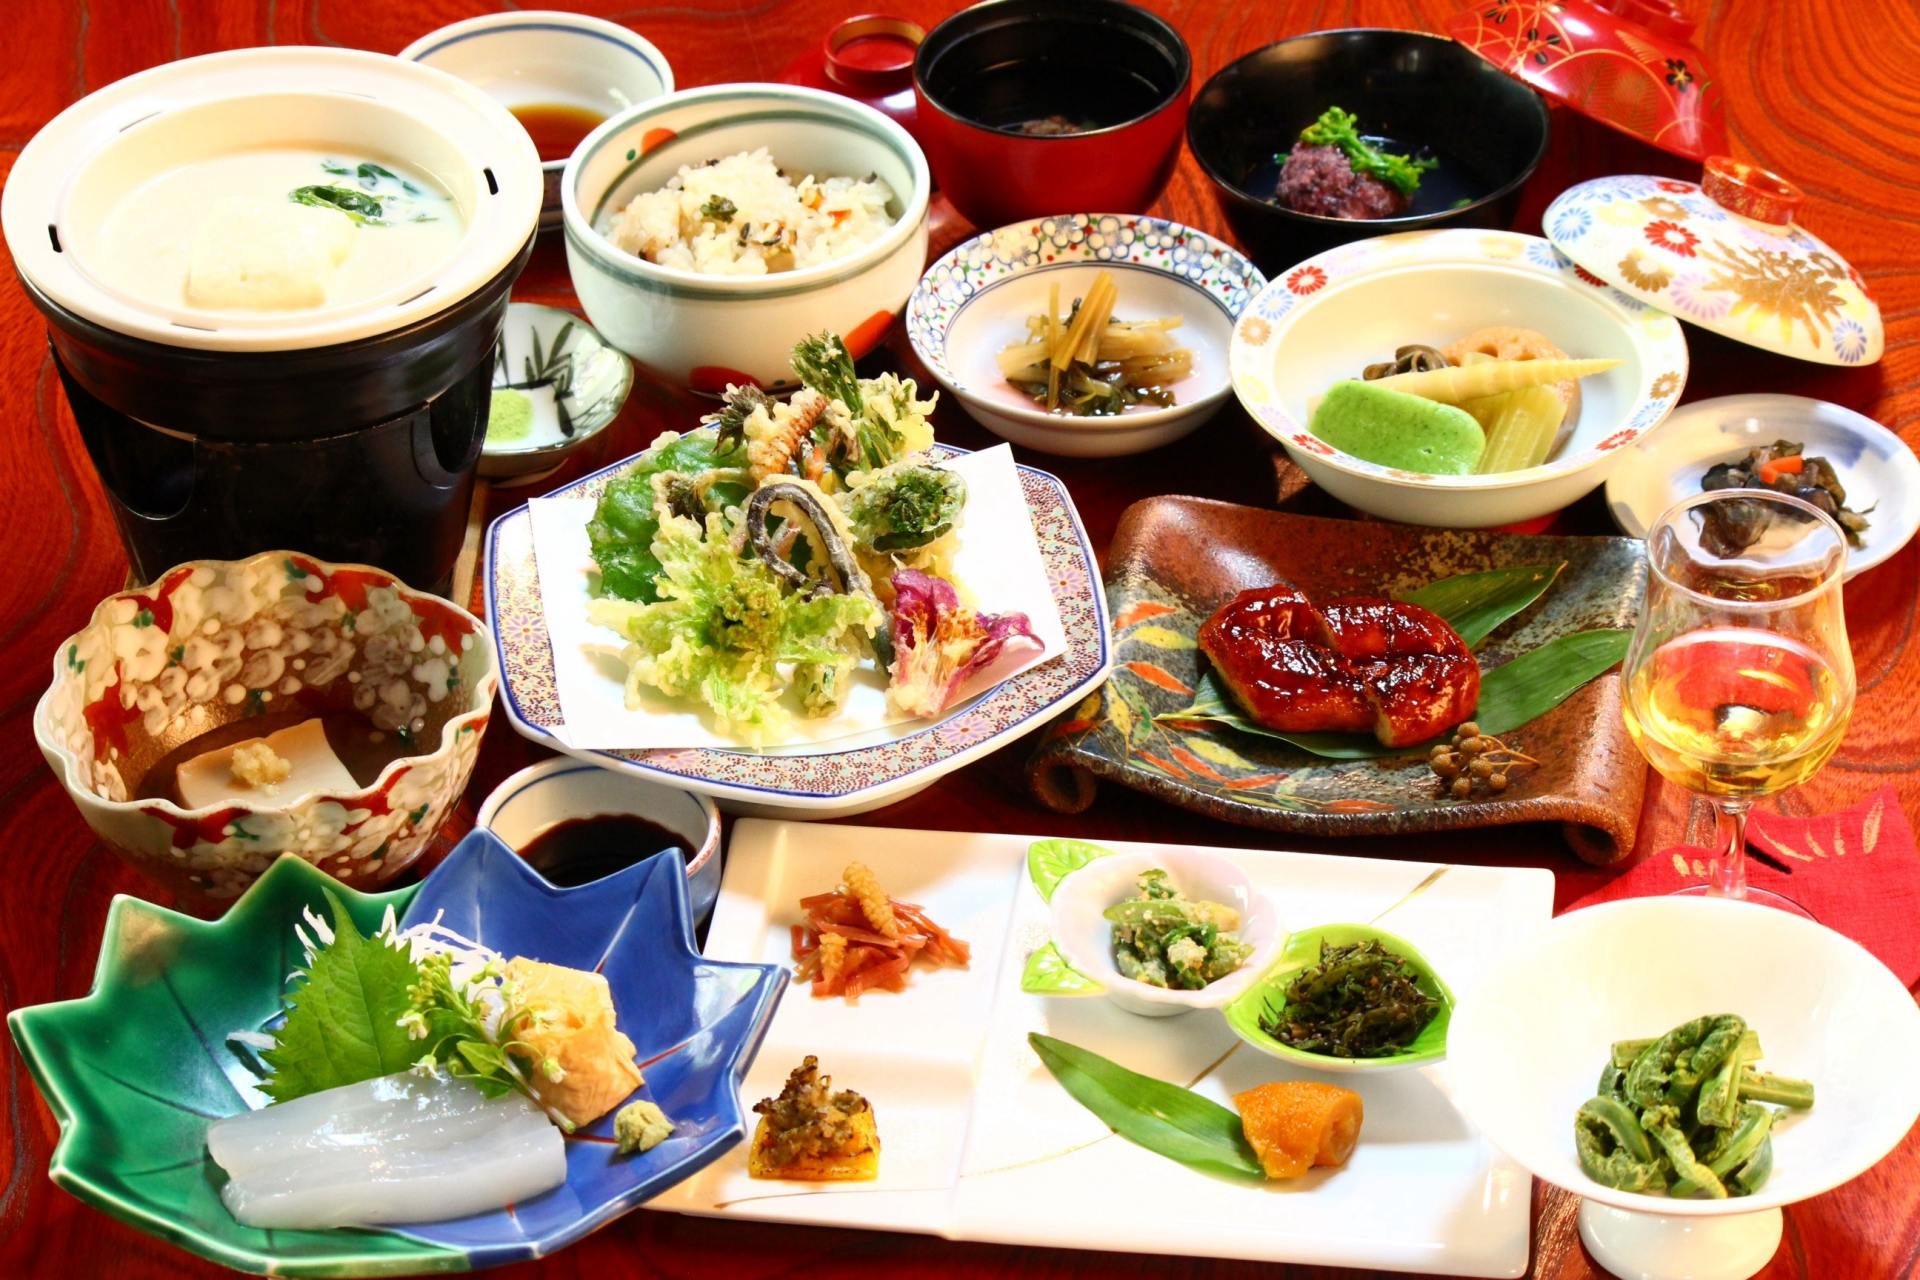 Organize your body, breath and mind with shojin ryori vegetarian food full of the blessings of Mt.Daisen.